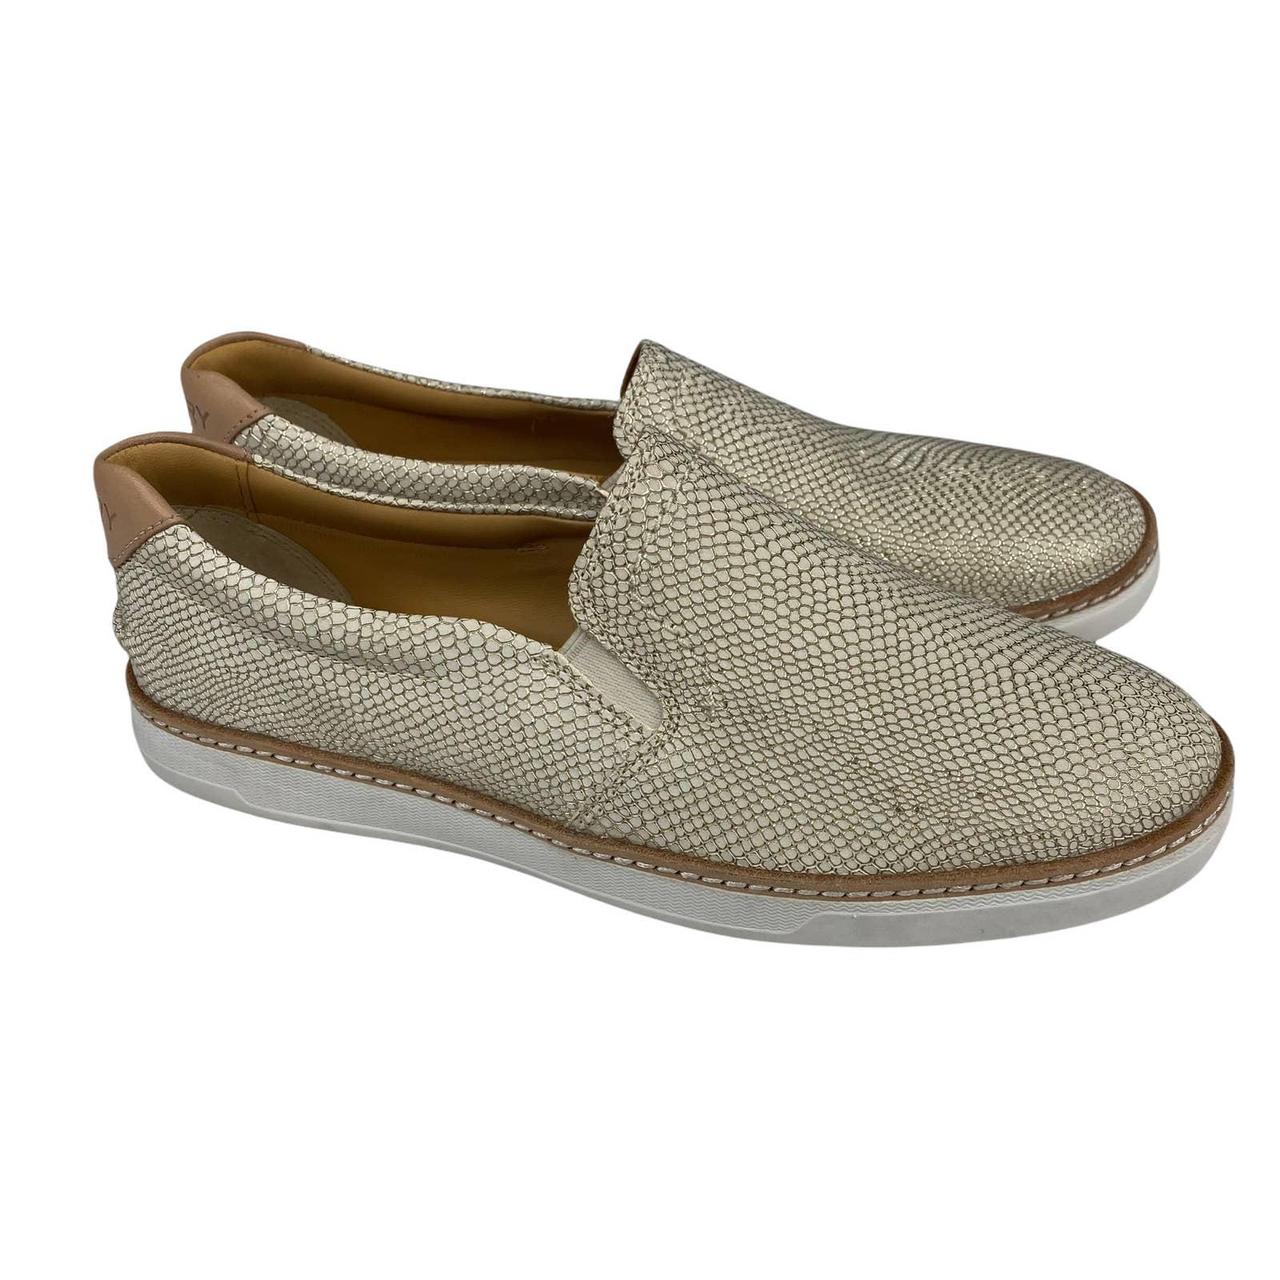 Sperry Women's White and Gold Loafers